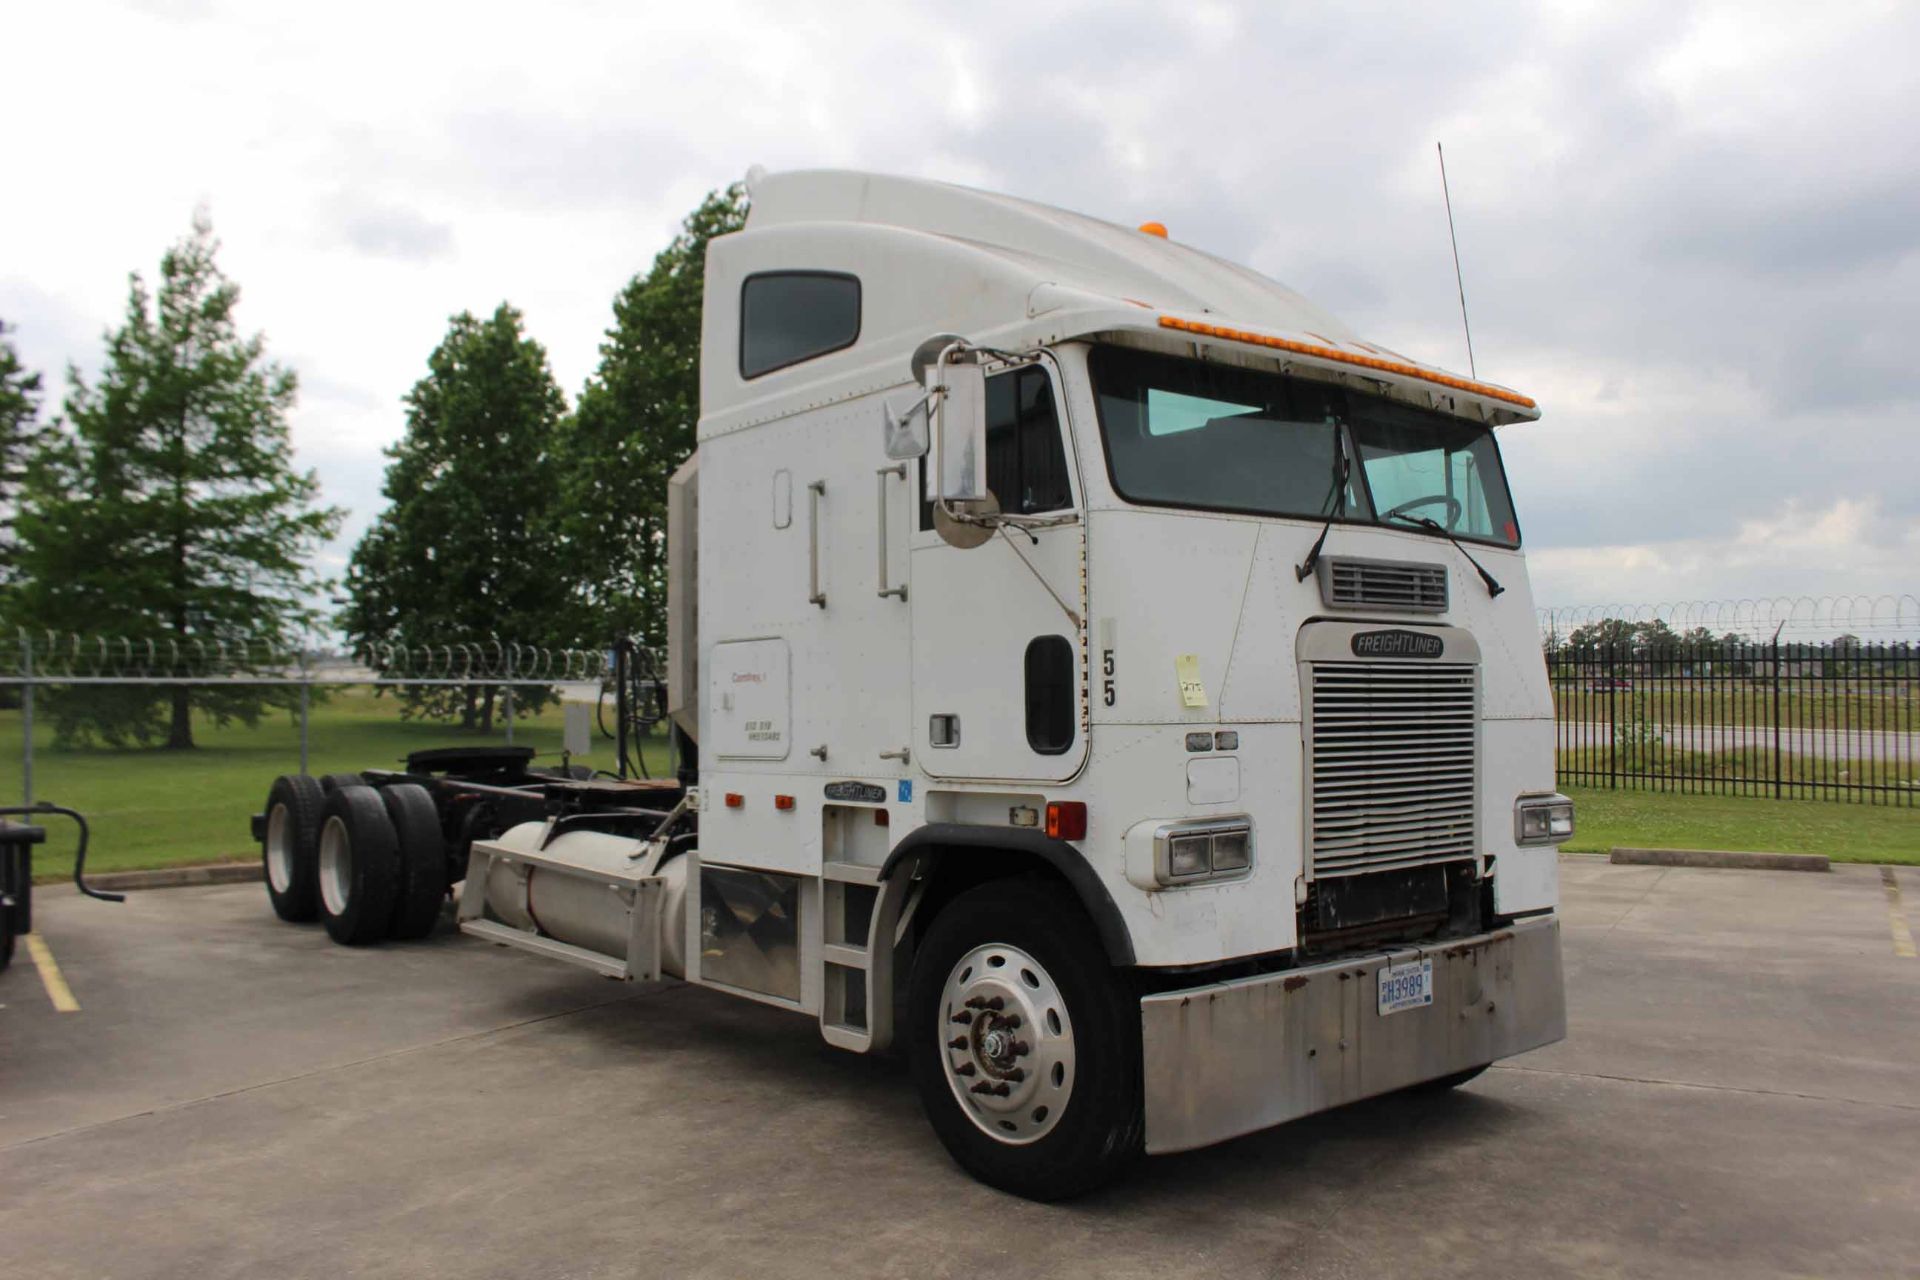 CAB OVER 18-WHEELER TRACTOR TRUCK, FREIGHTLINER, GVWR 52,000, PTO, tandem rear axles, 106949.6